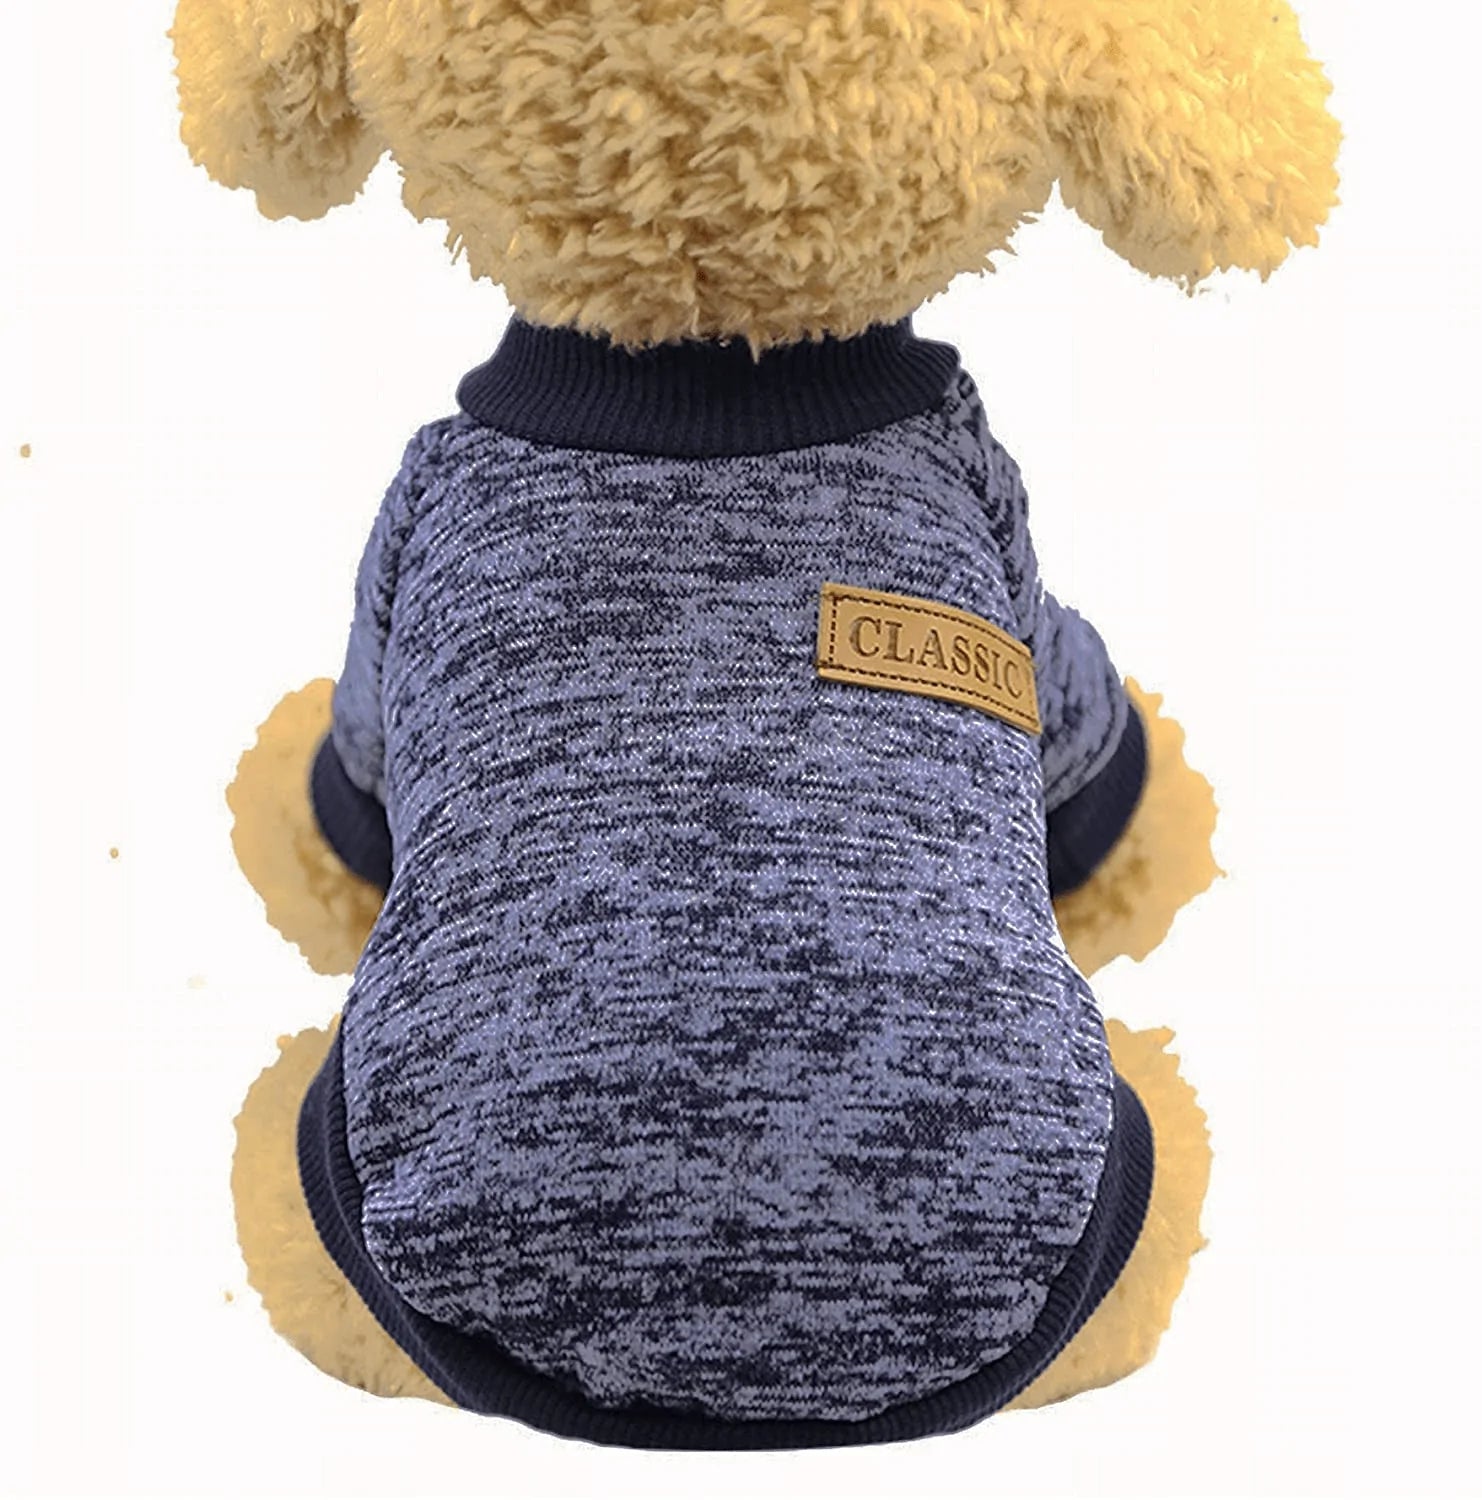 YAODHAOD Dog Sweater Winter Pet Dog Clothes Knitwear Soft Thickening Warm Pup Dogs Sweatshirt Coat for Small Dog Puppy Kitten Cat Animals & Pet Supplies > Pet Supplies > Cat Supplies > Cat Apparel YAODHAOD Blue Medium 